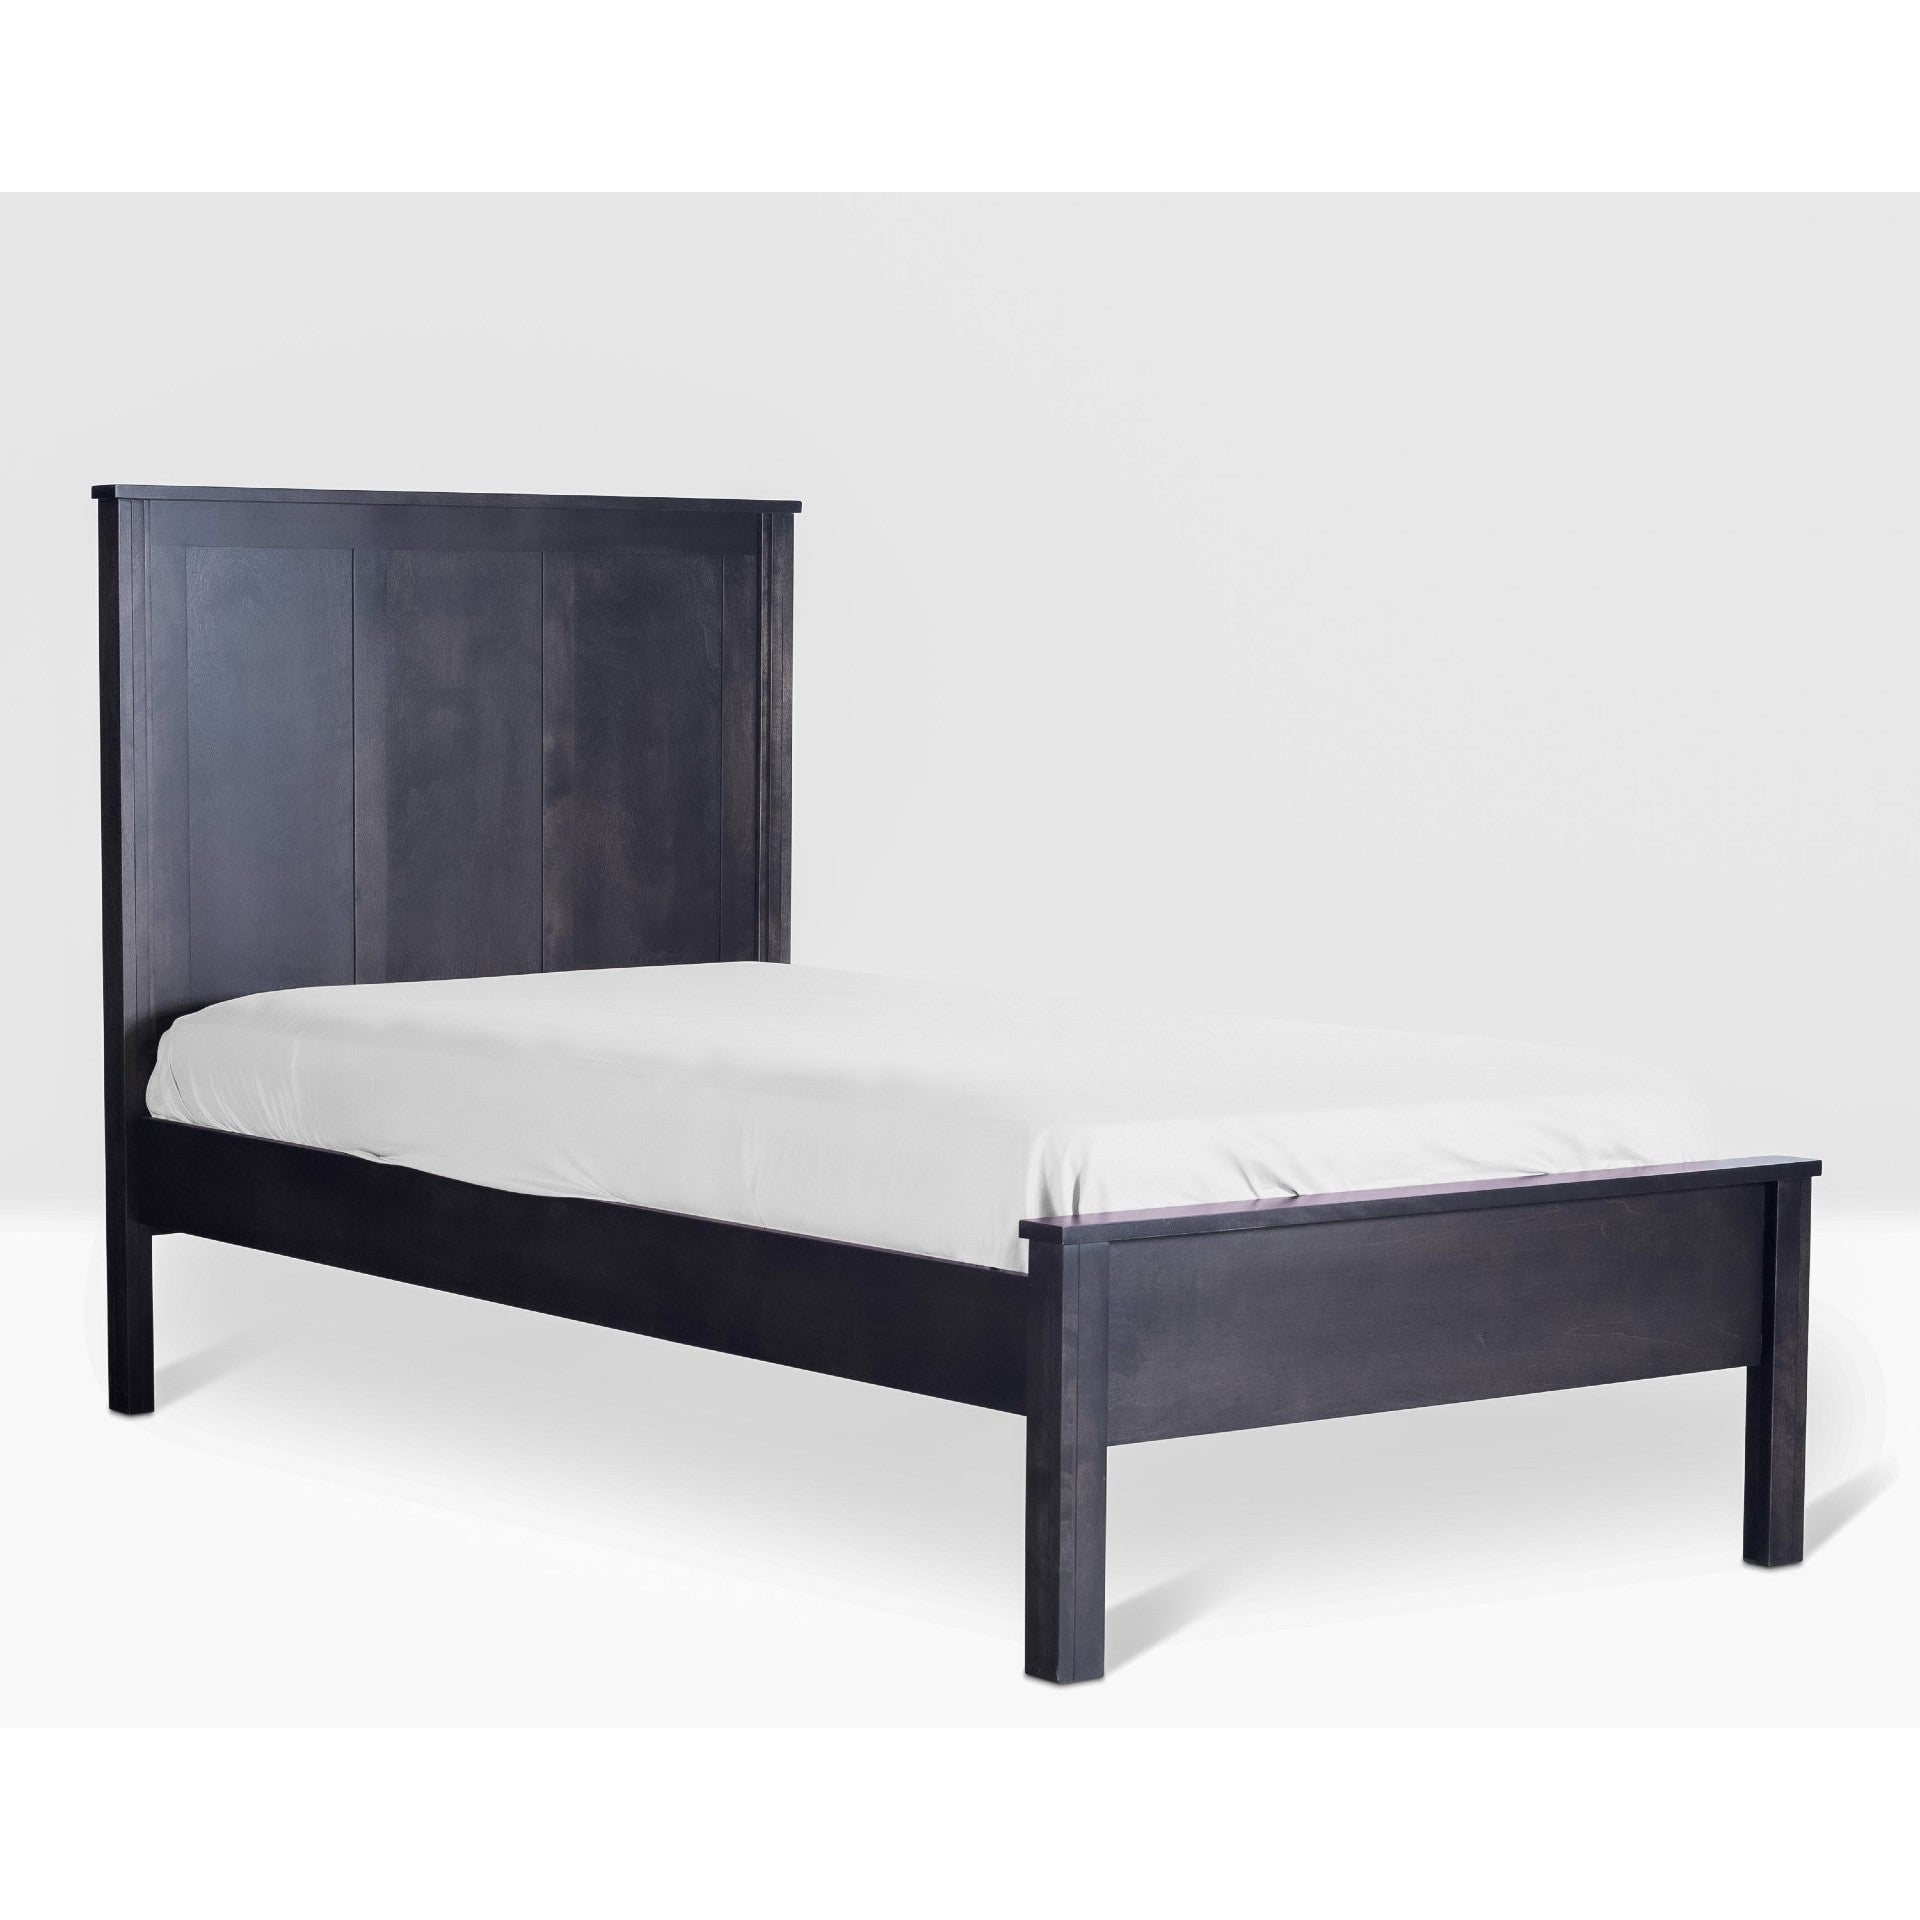 Acadia Tremont Platform bed with Simple Footboard is constructed in birch, and shown in a Nitefall finish.